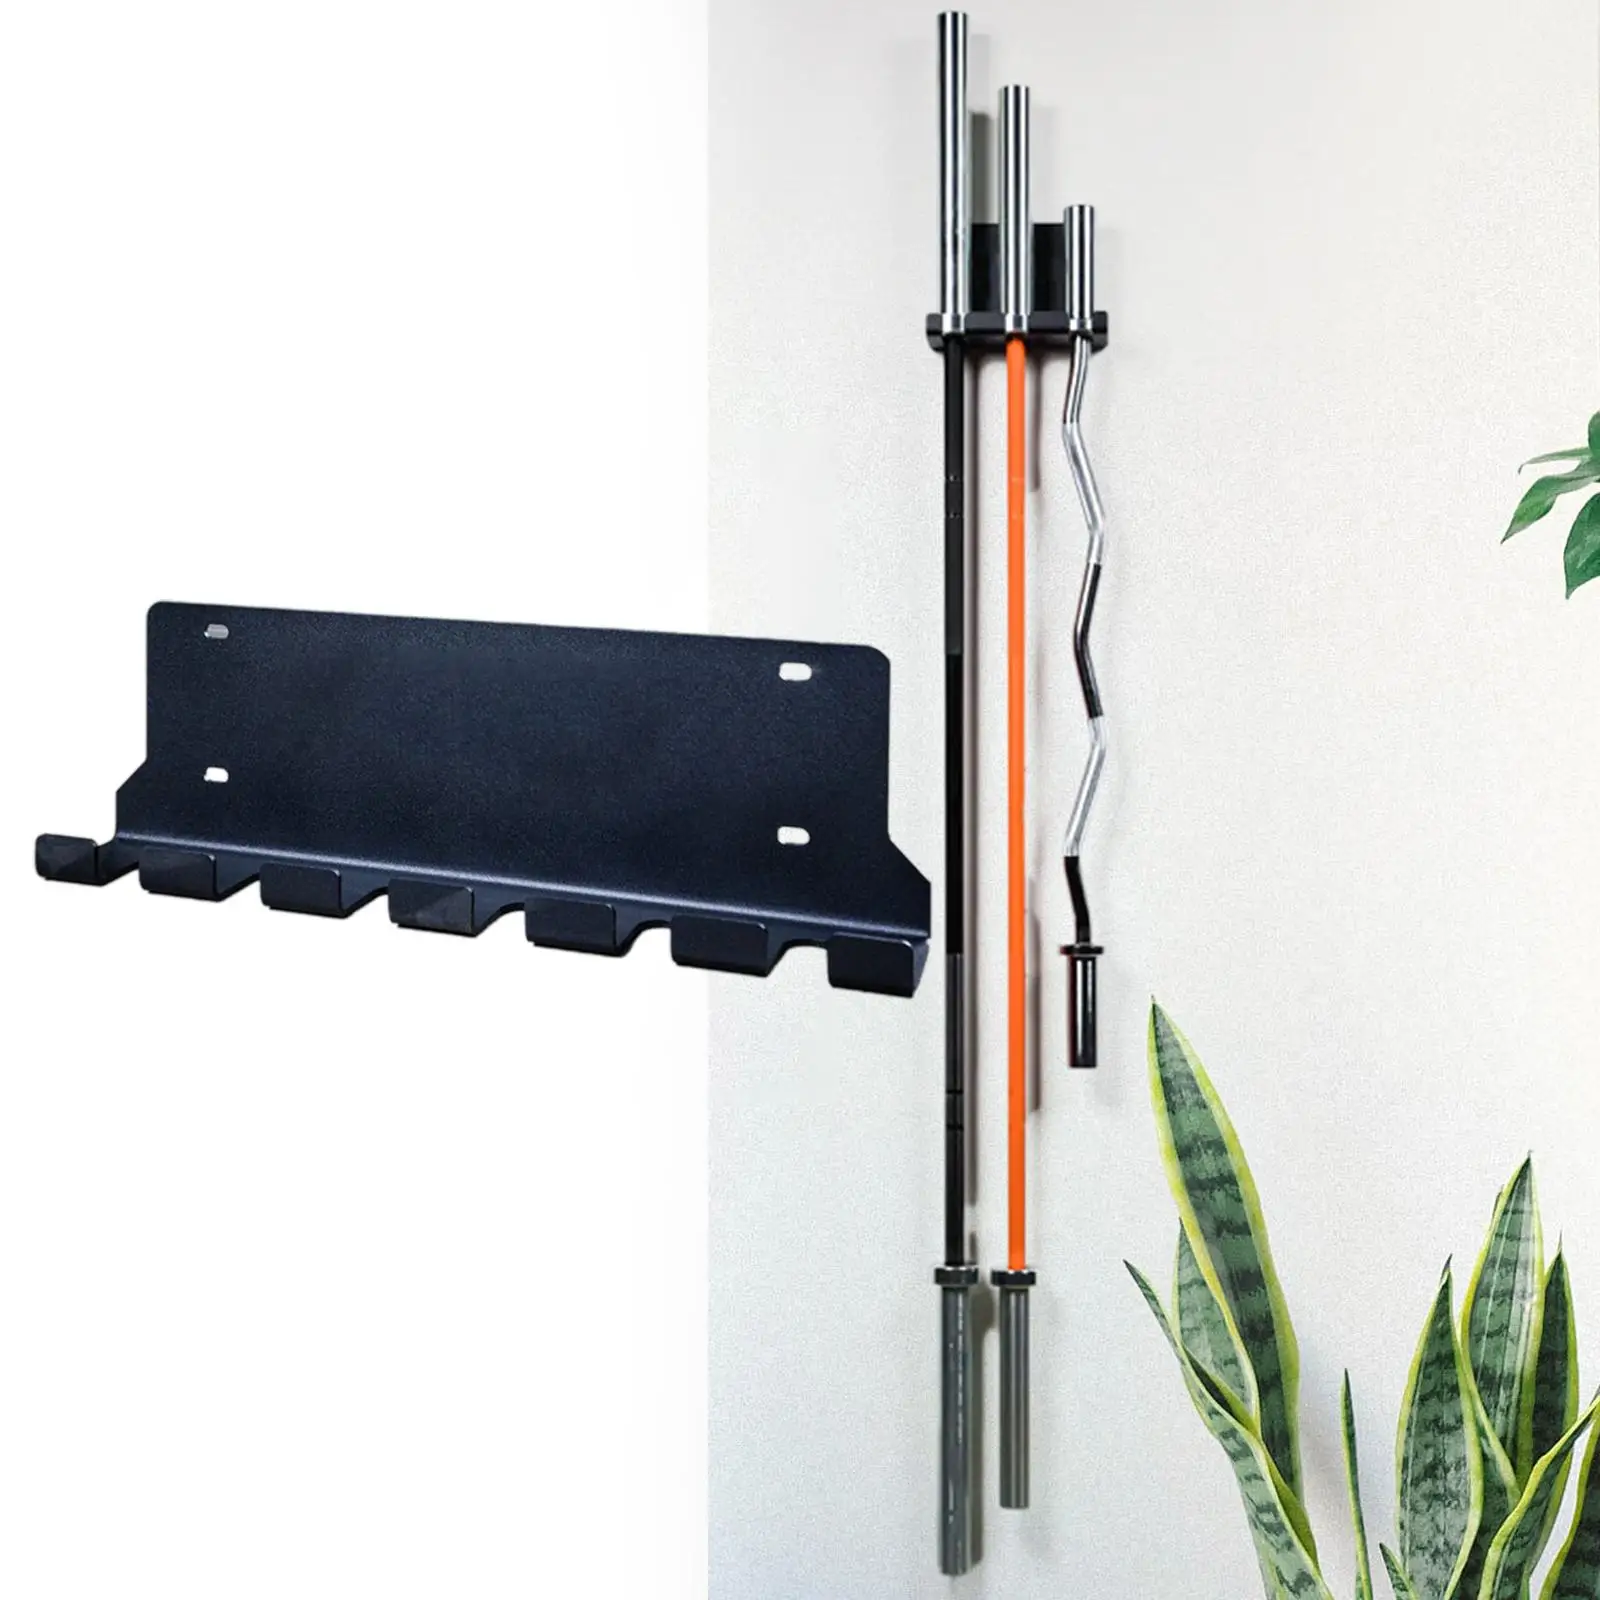 Barbell Storage Holder Rack Display Vertical bars Holder Storage Space Saving Wall Mounted Hanger for Home Fitness Accessories